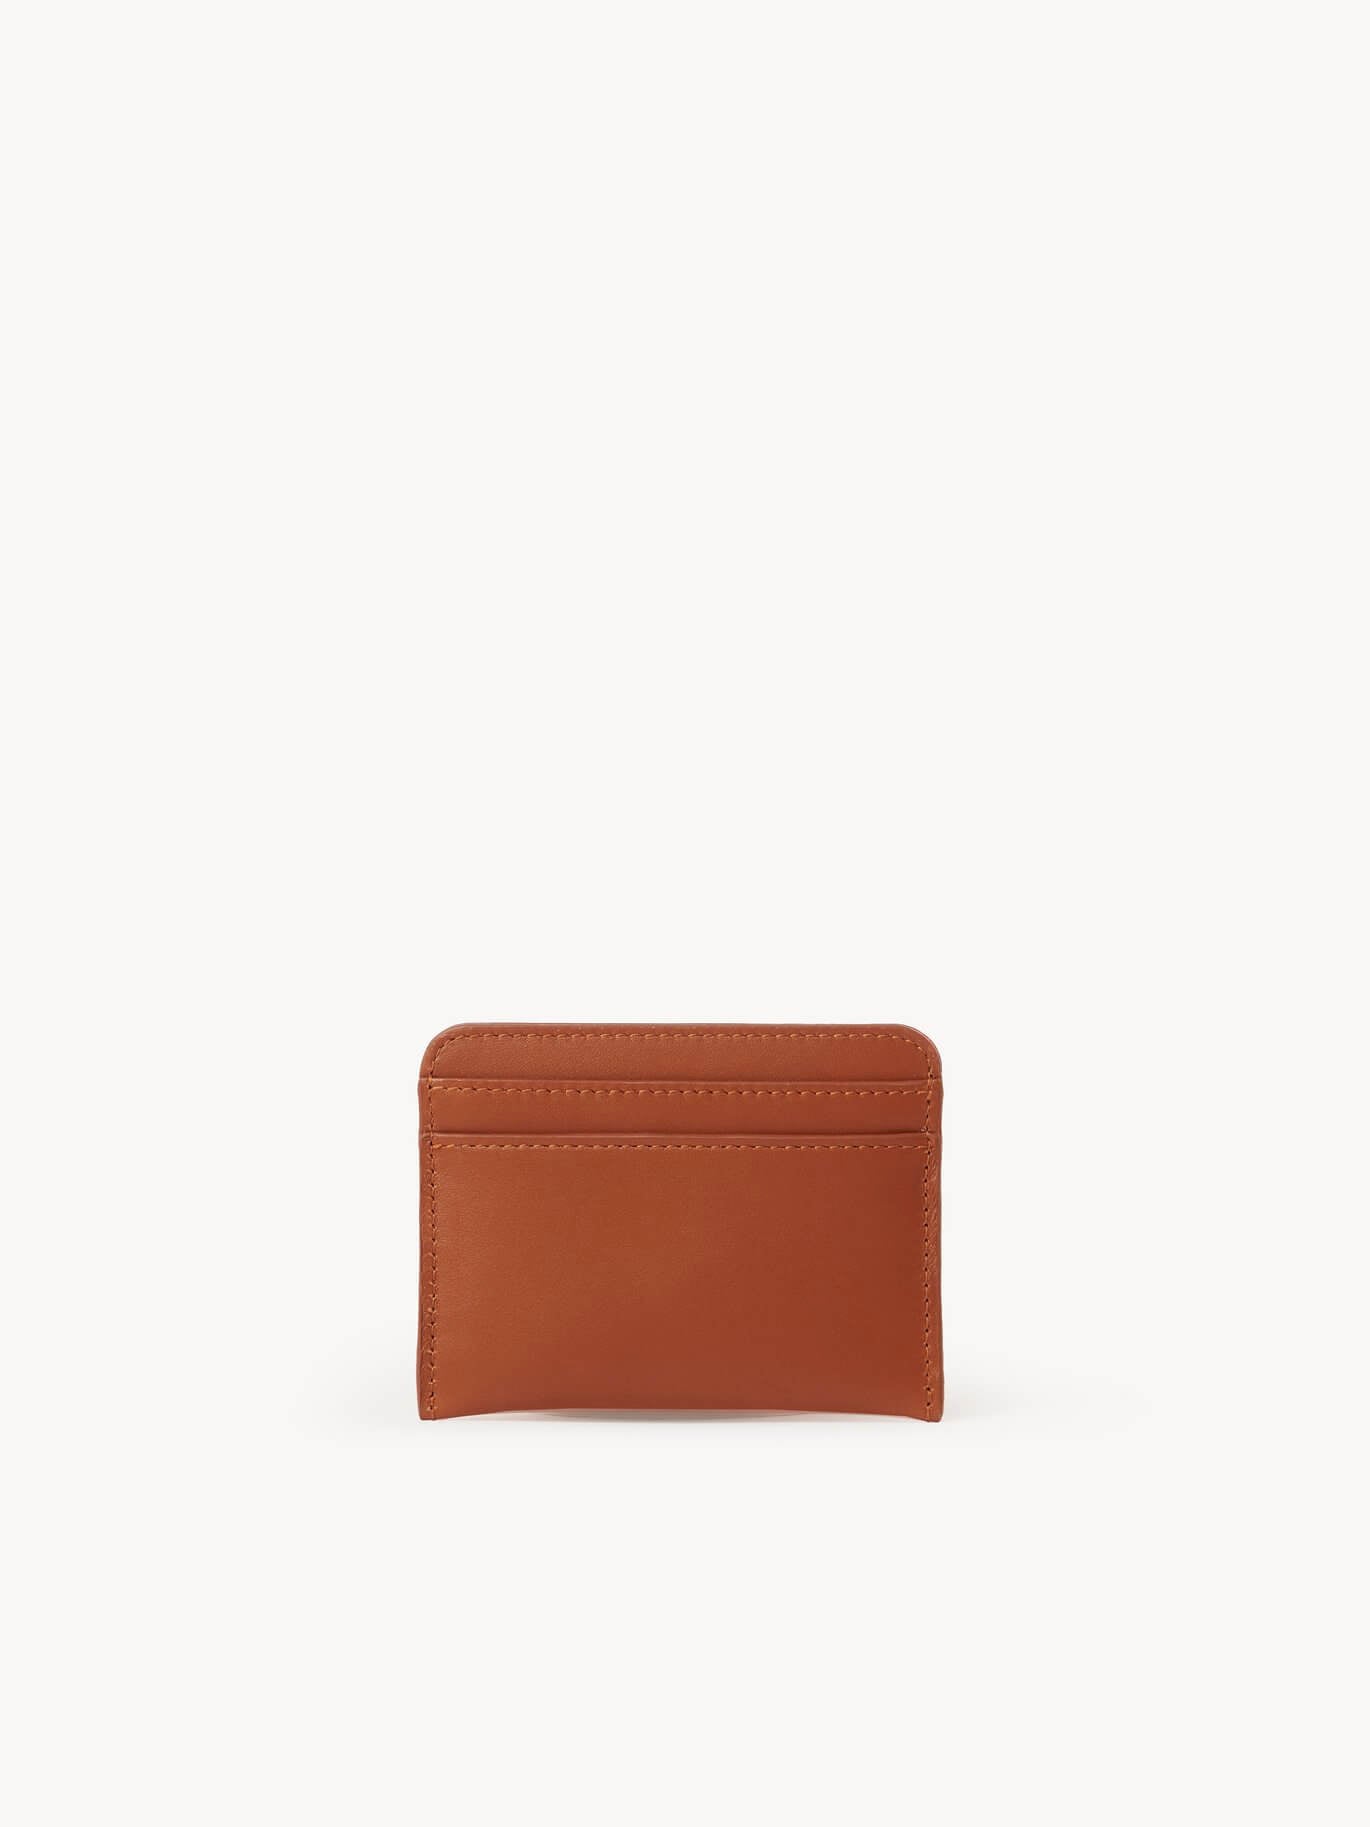 Chloe Sense Cardholder in Caramel available at The New Trend